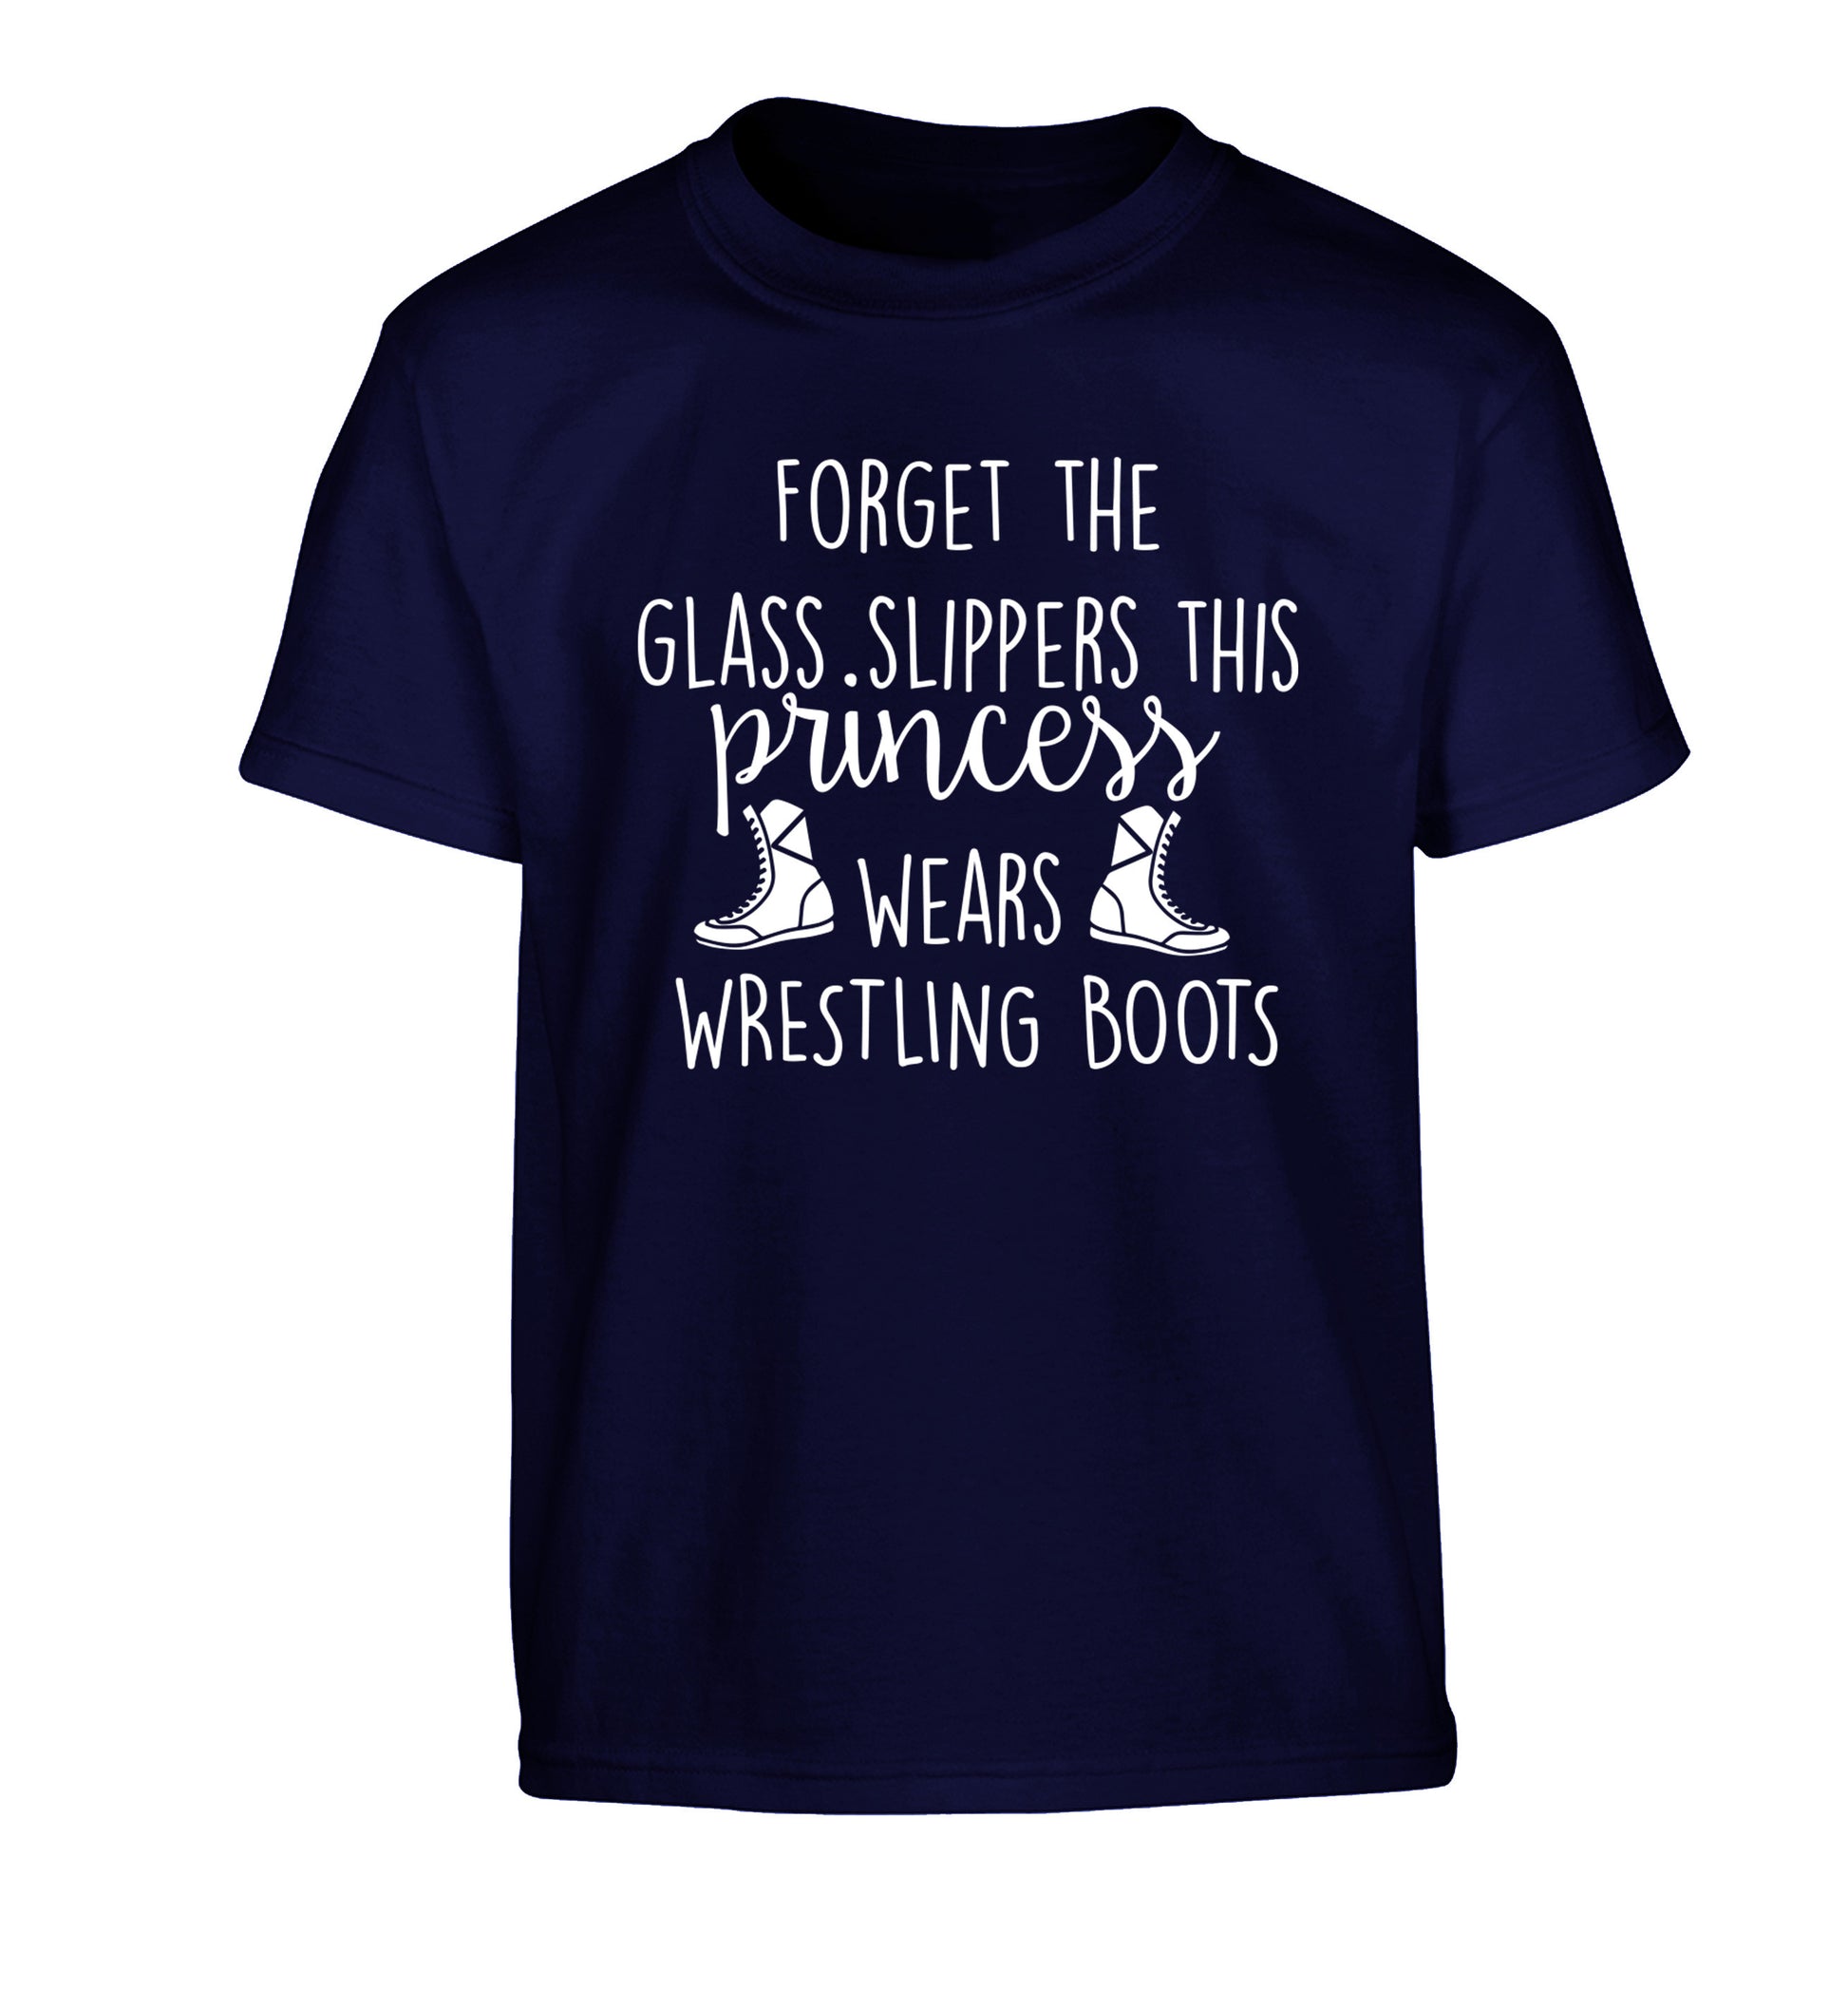 Forget the glass slippers this princess wears wrestling boots Children's navy Tshirt 12-14 Years